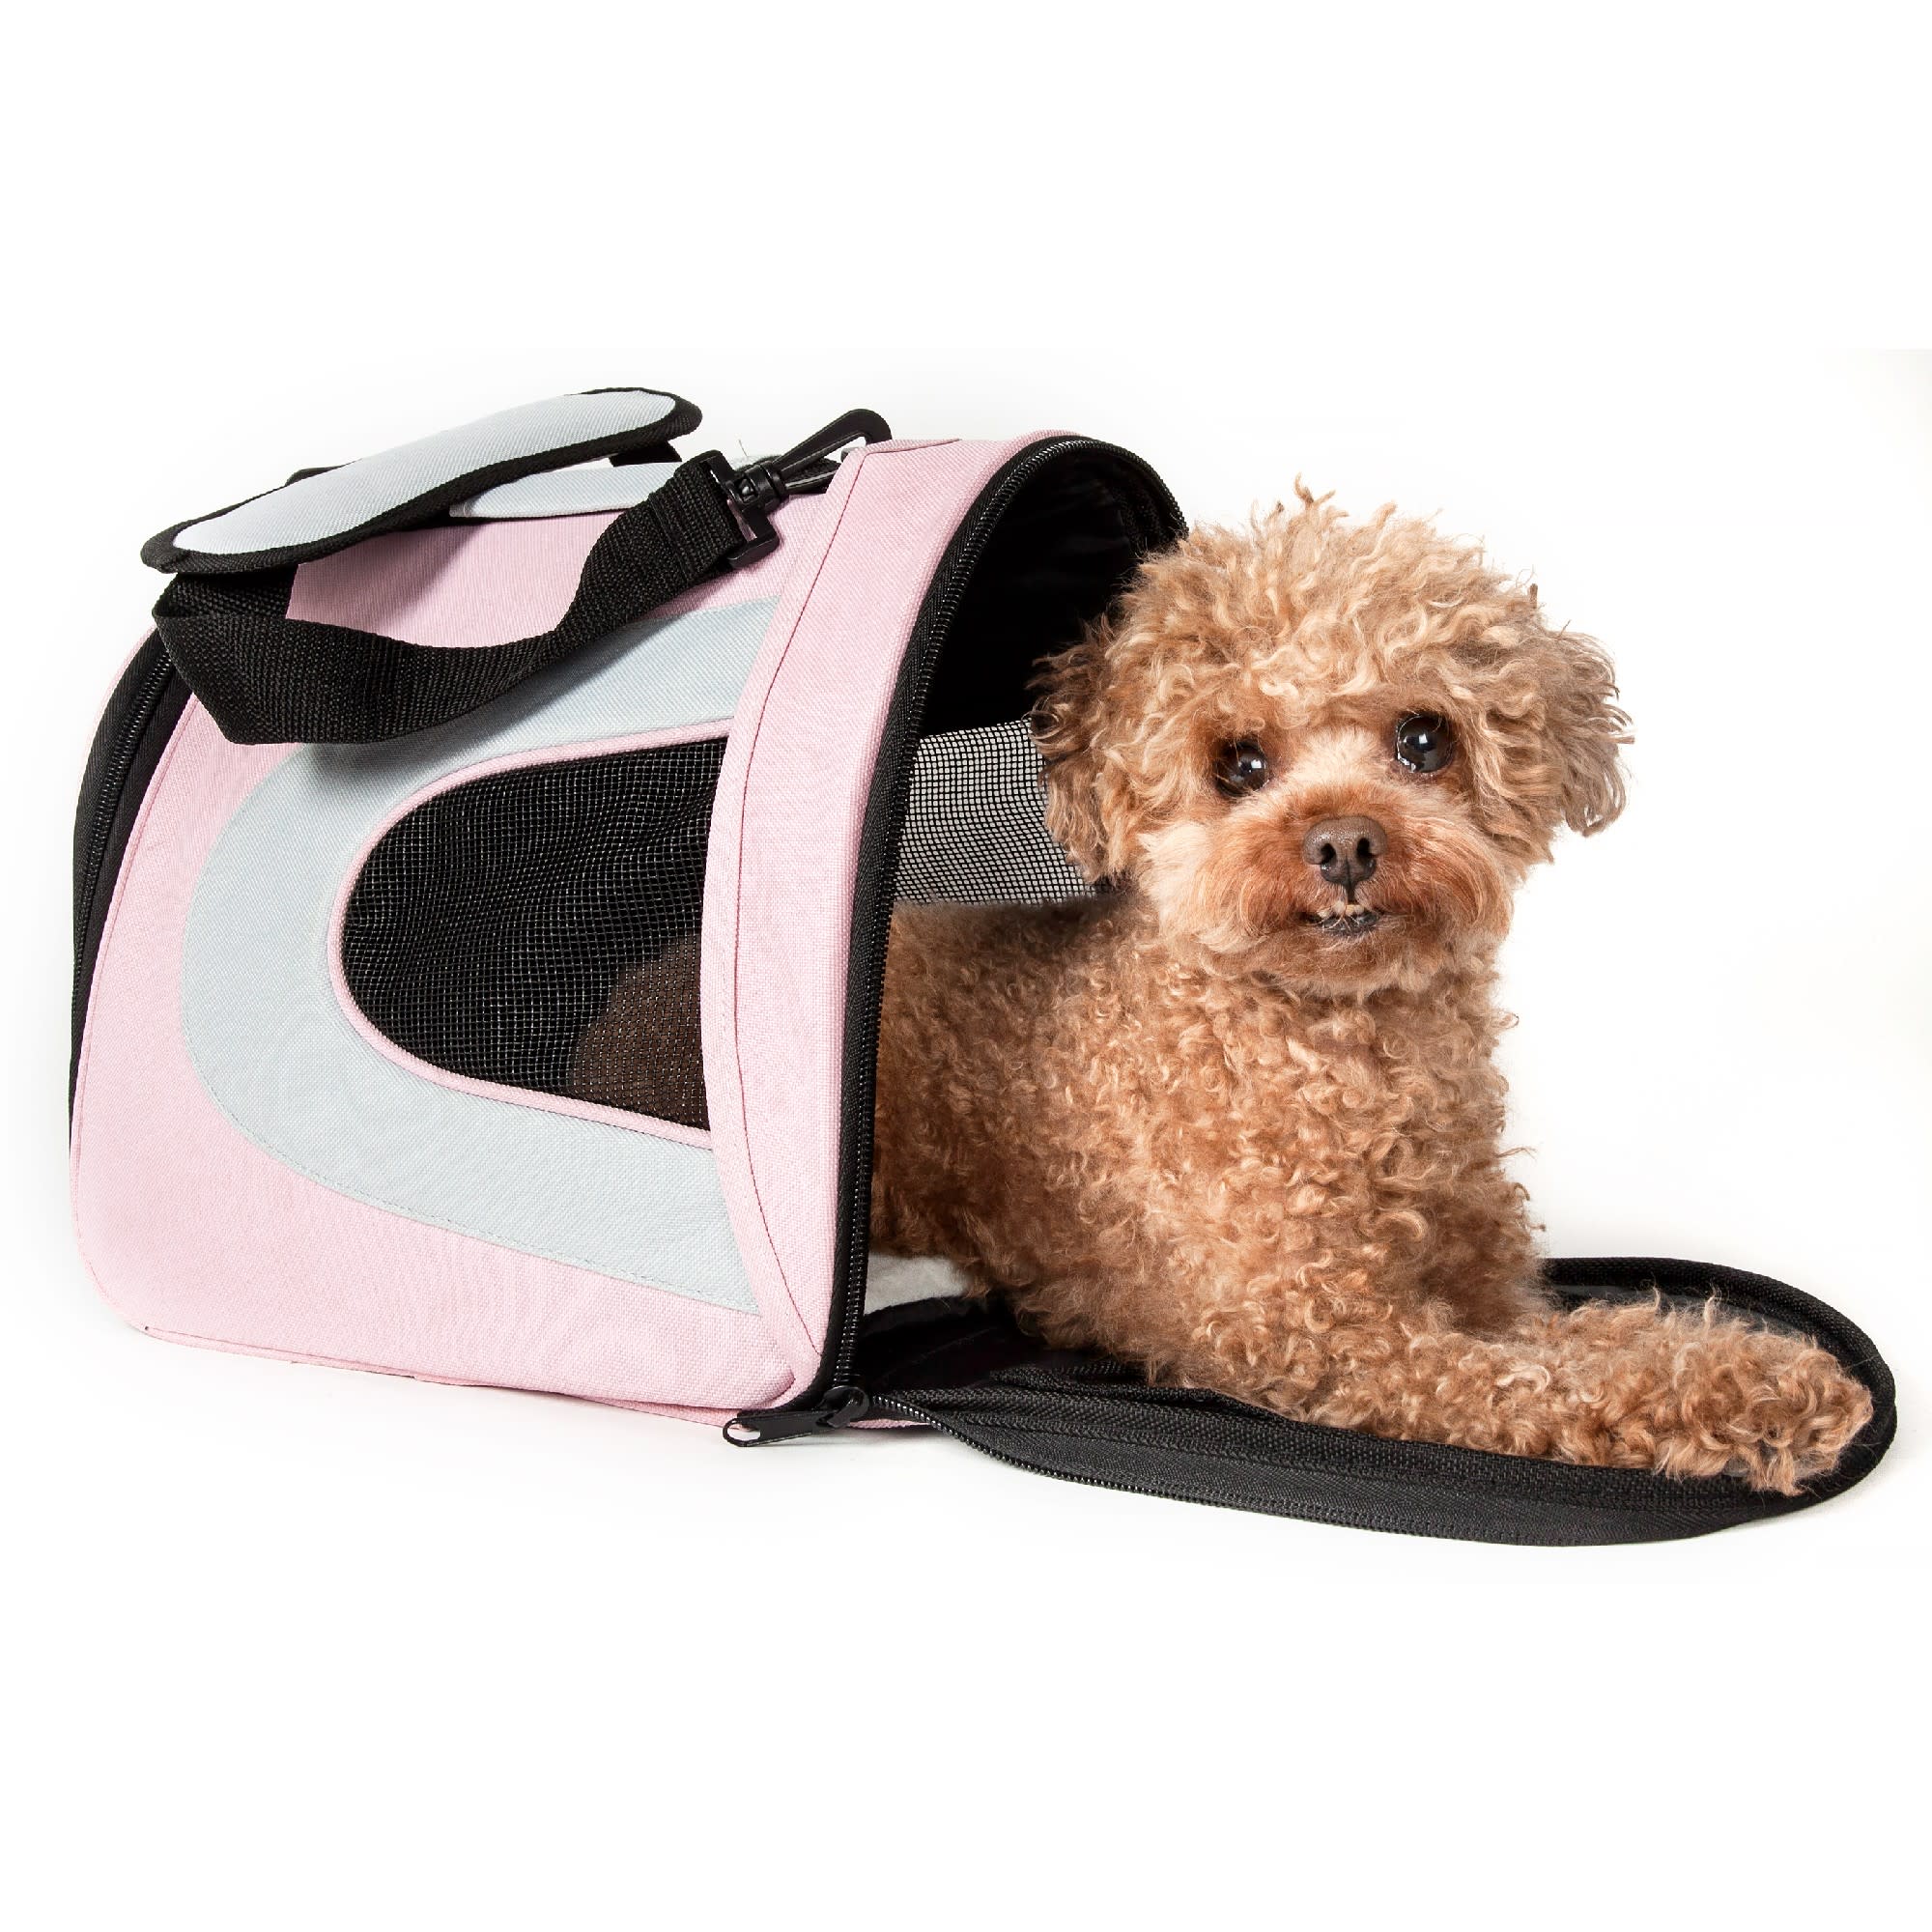 Pet Life Folding Zippered Sporty Mesh Pet Carrier in Pink & Gray